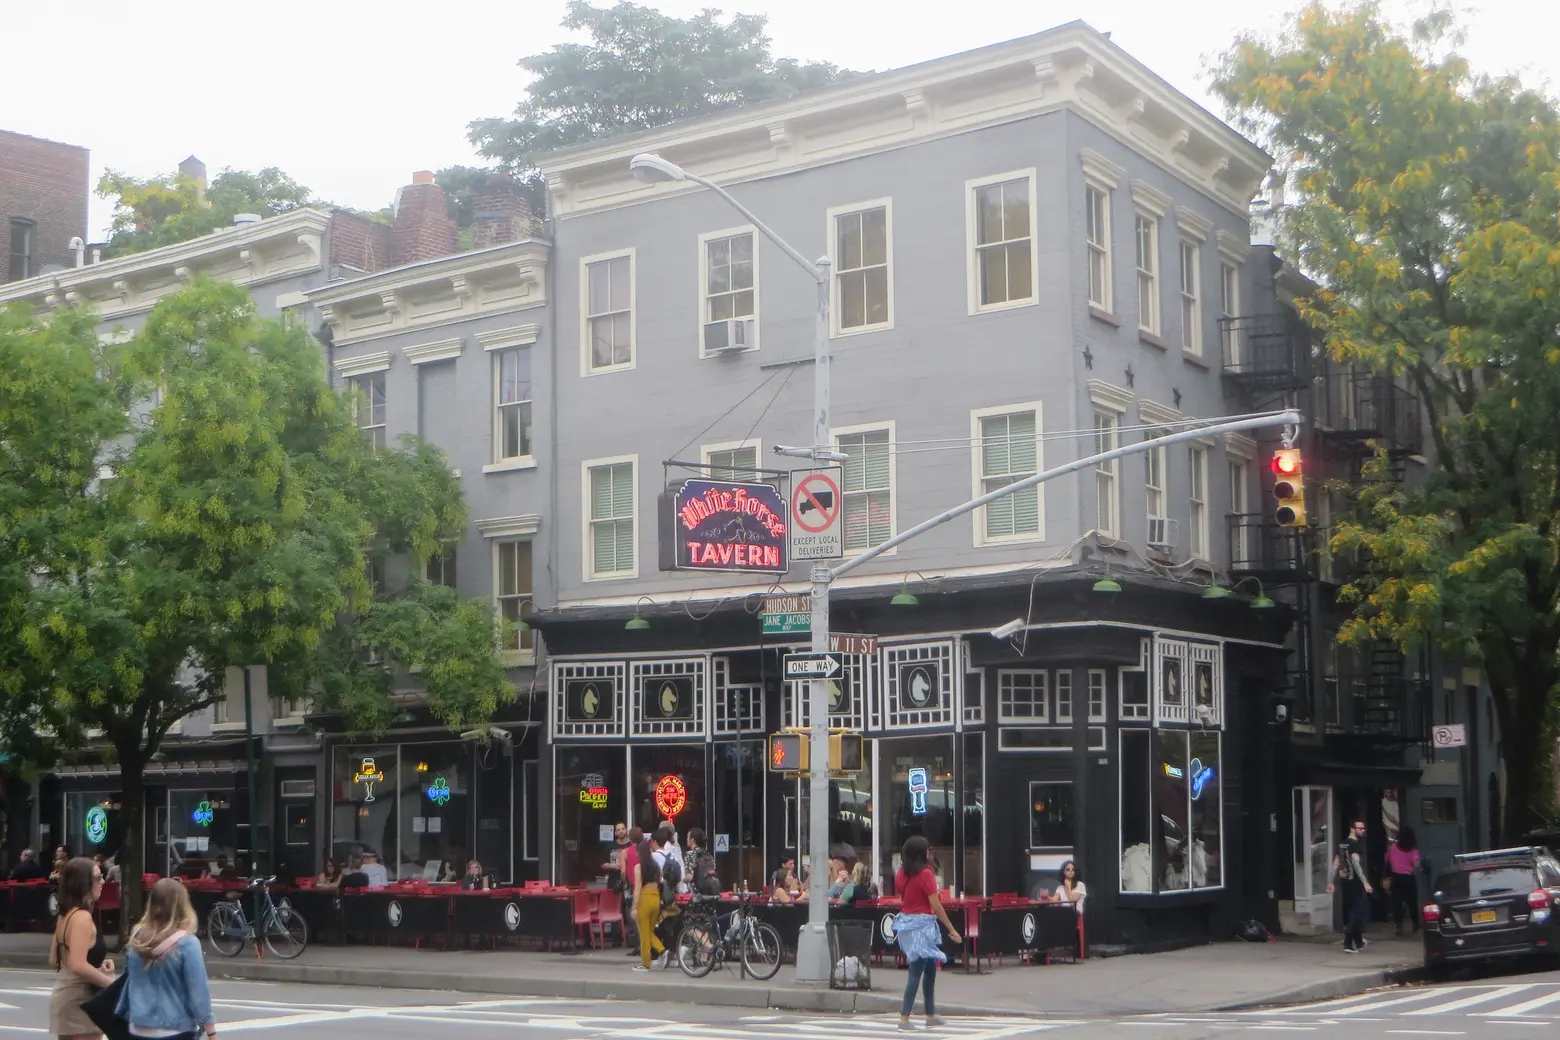 White Horse Tavern temporarily loses liquor license over social distancing violations